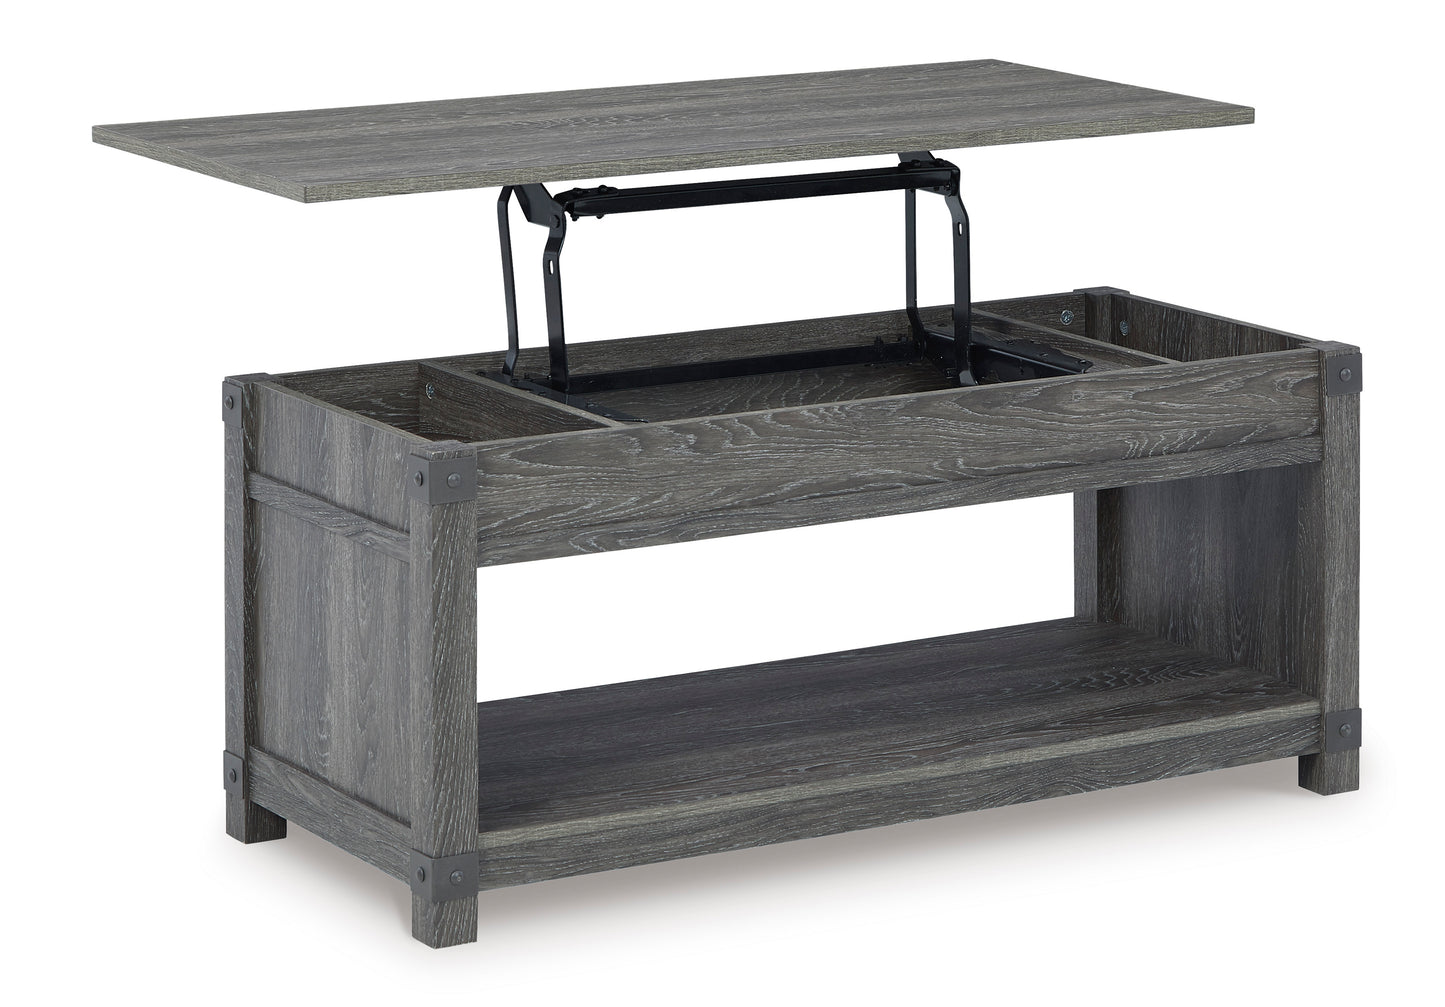 T175 Lift-Top Coffee Table